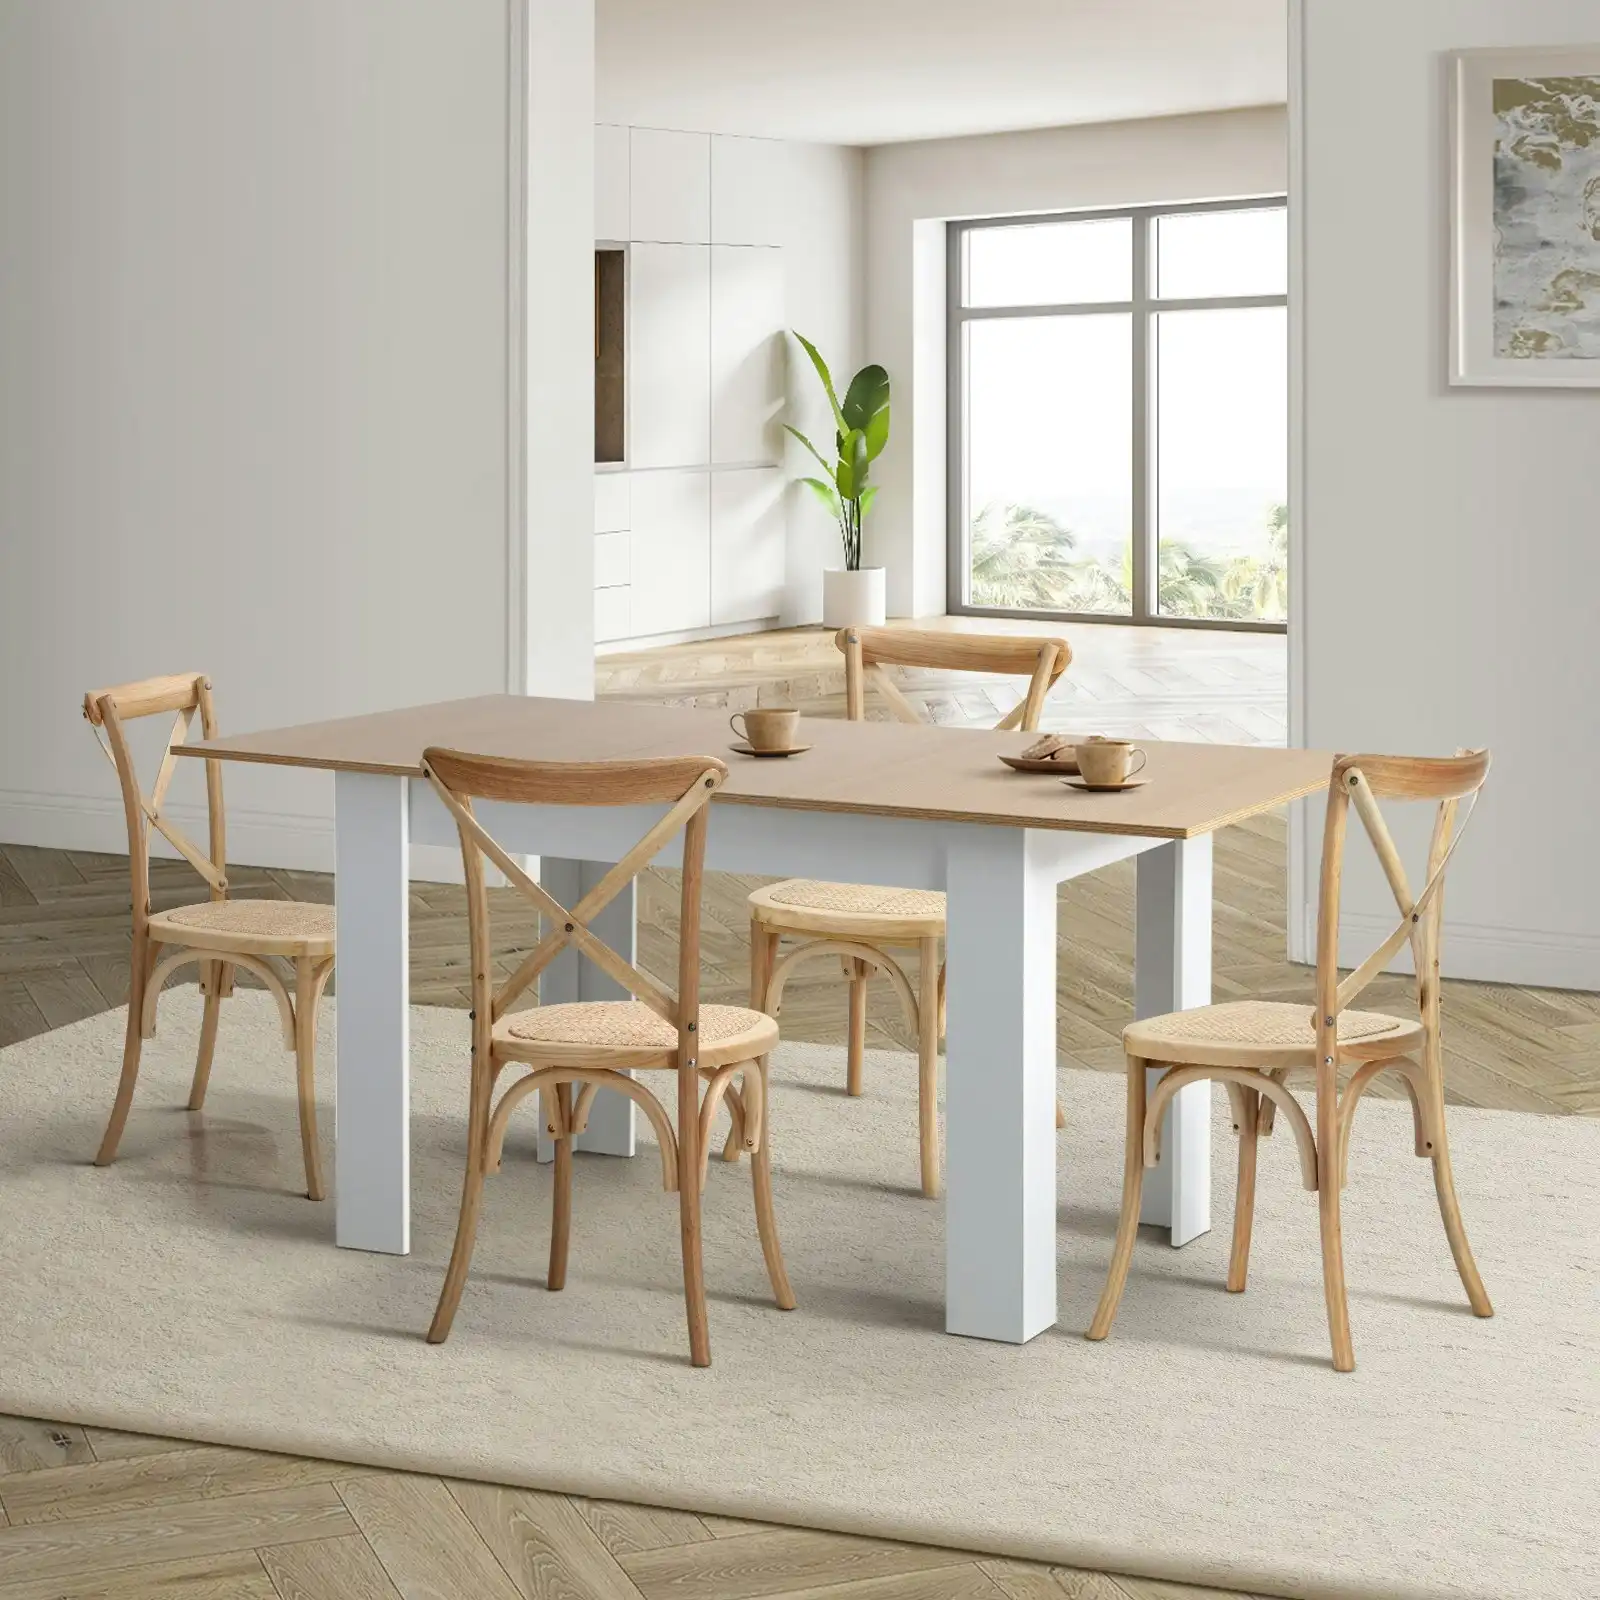 Oikiture 160cm Extendable Dining Table with 4PCS Dining Chairs Crossback Wooden